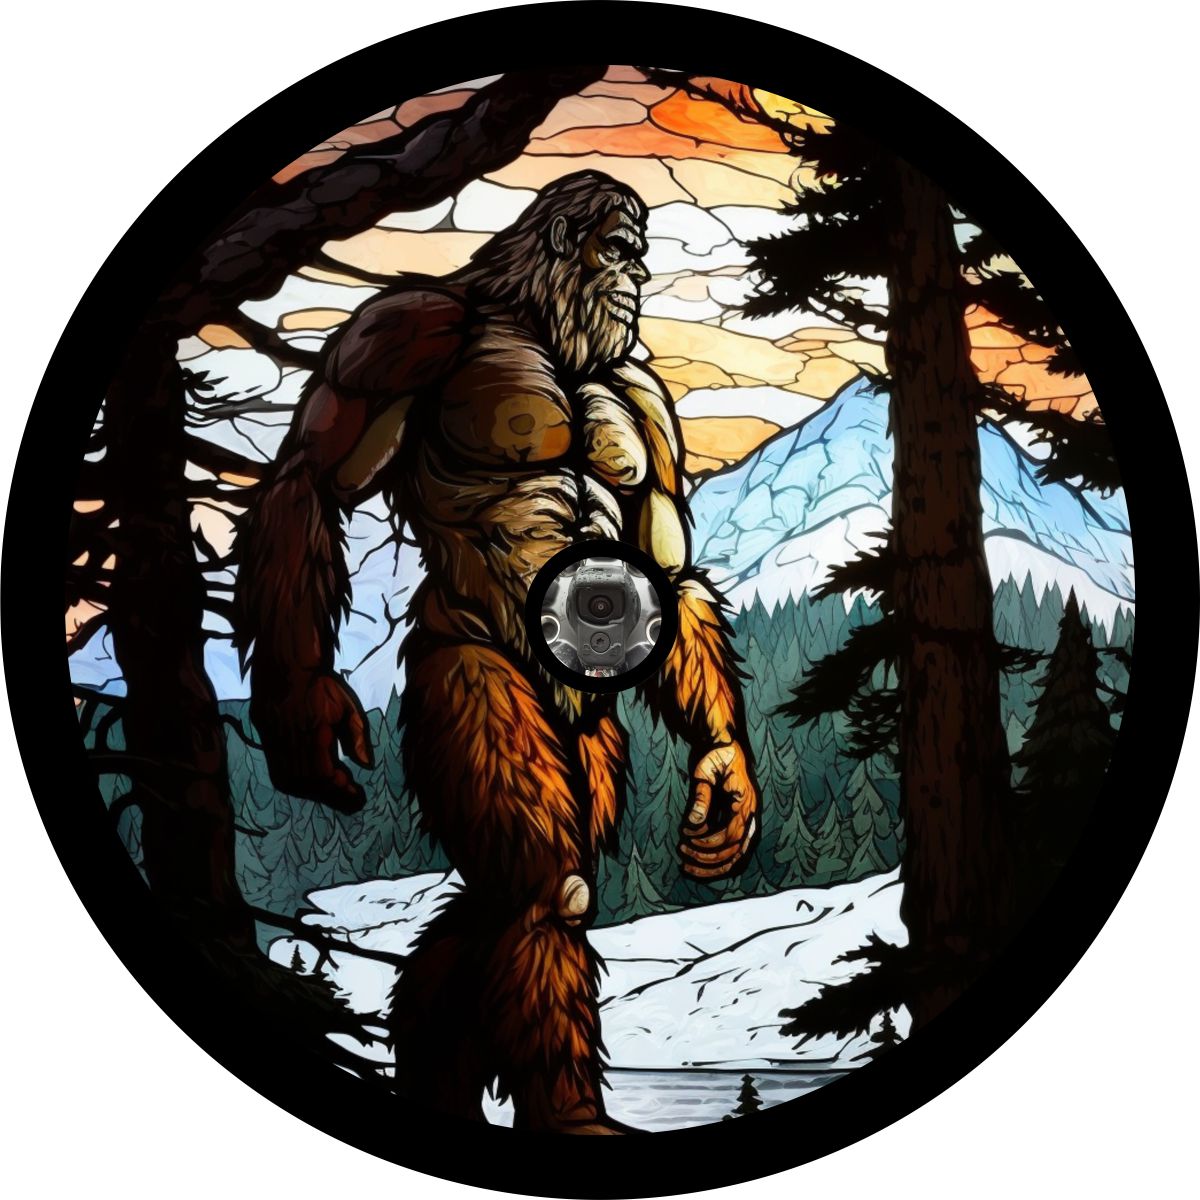 Black vinyl spare tire cover of Sasquatch designed to look like the style of stained glass for an vehicle tire cover with a format to fit a backup camera.